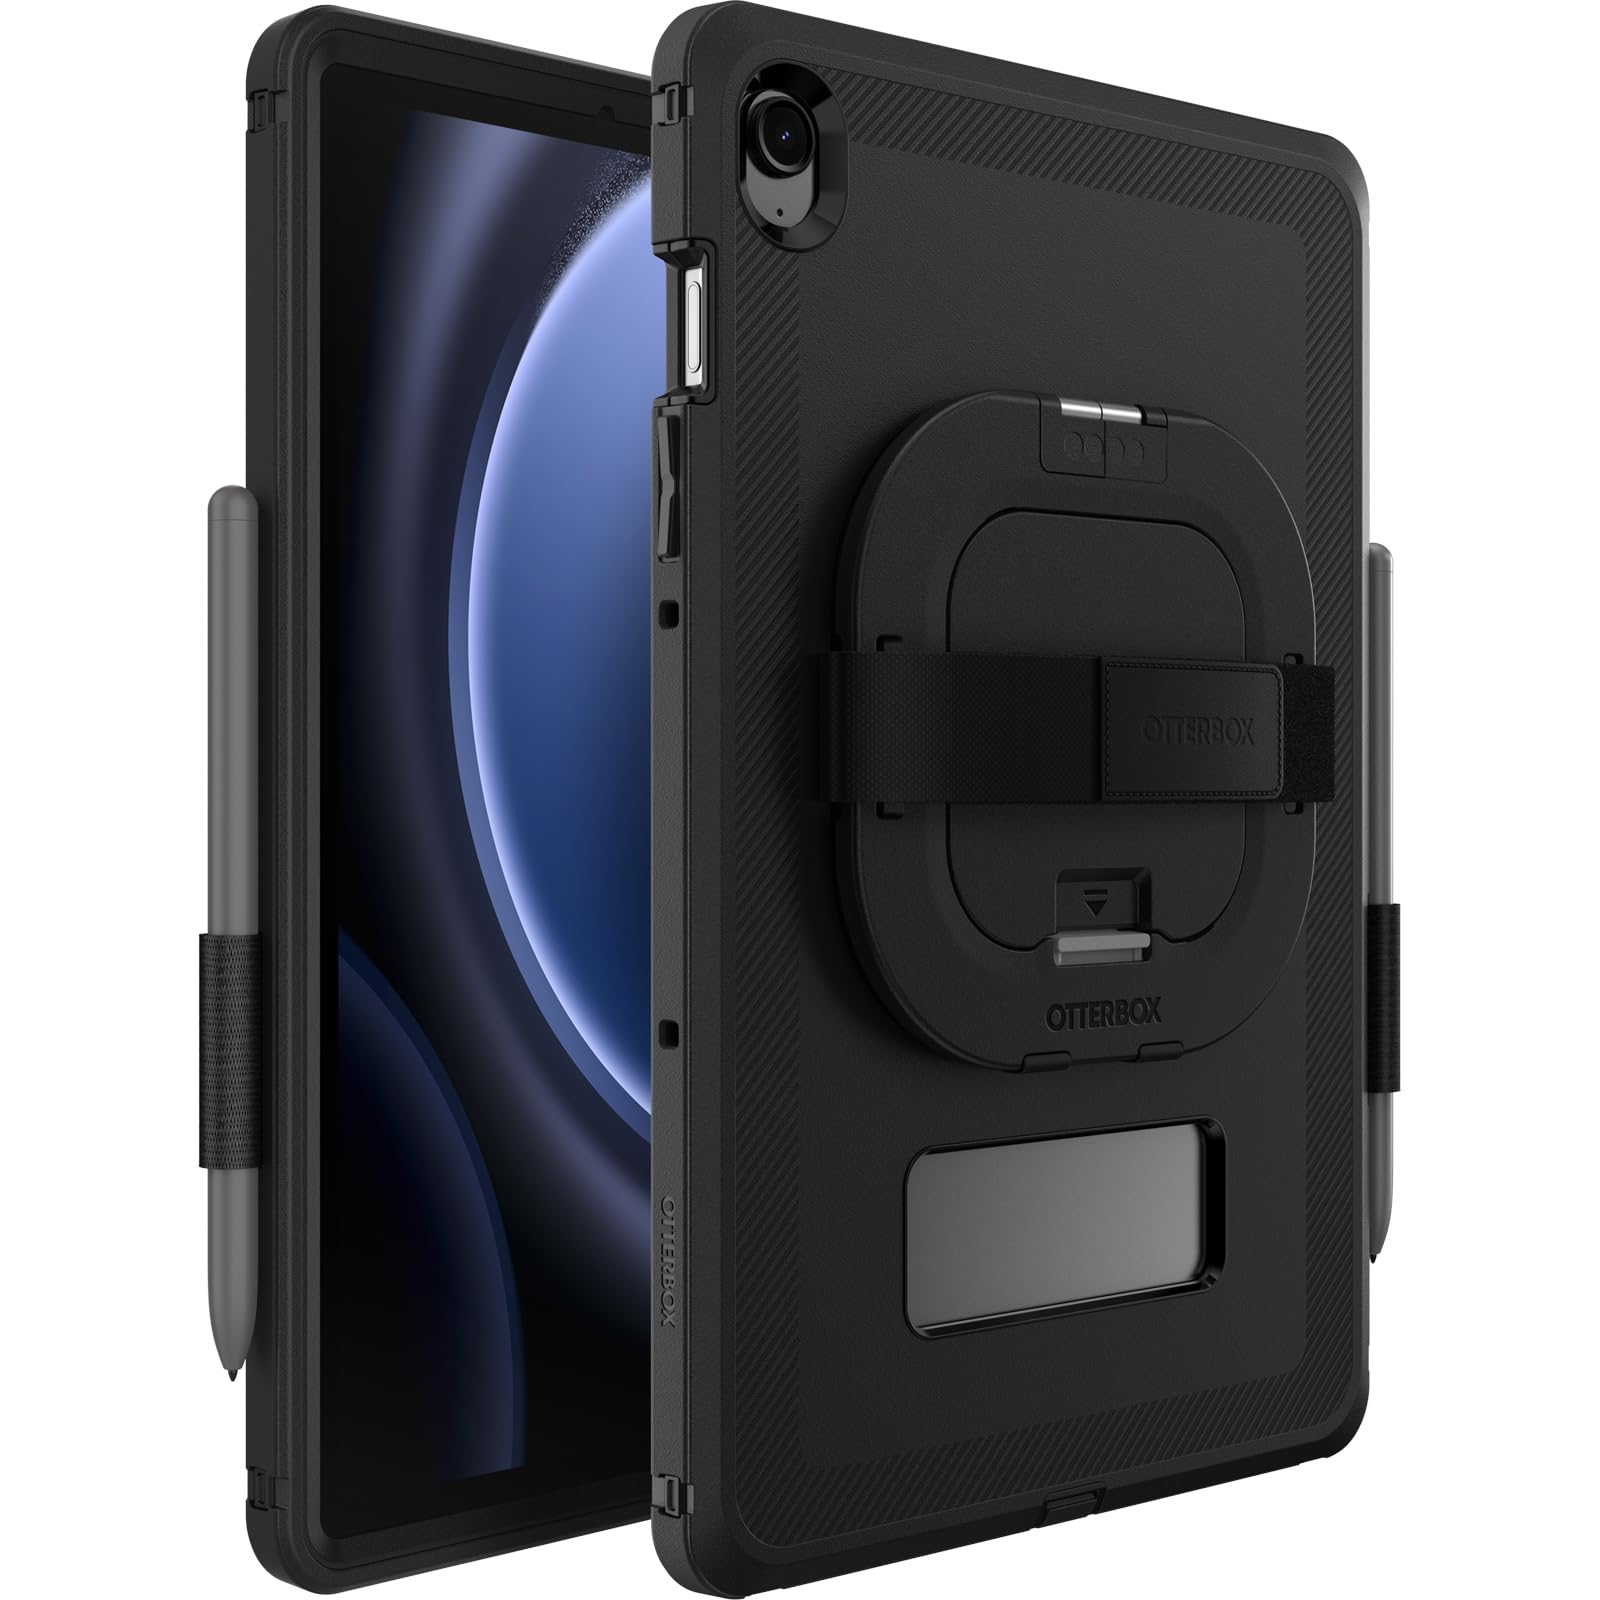 OtterBox Defender for Business W/Kickstand/HANDSTRAP for TAB S9 FE (ONLY) - Black (Non-Retail Packaging)